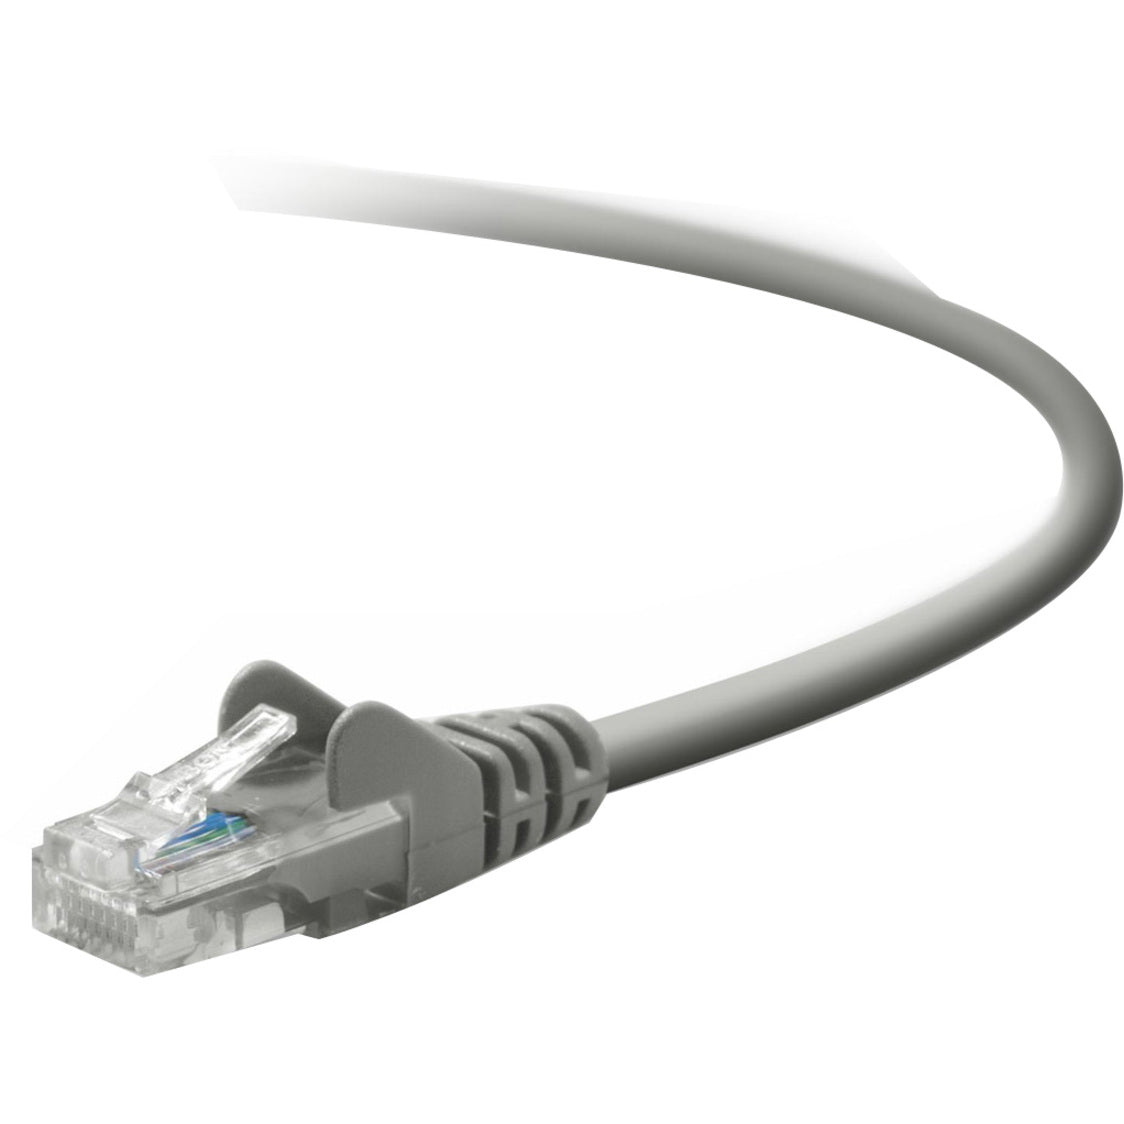 Belkin A3L791-06 Cat5e Network Cable, 6 ft, Fast and Reliable Transmission